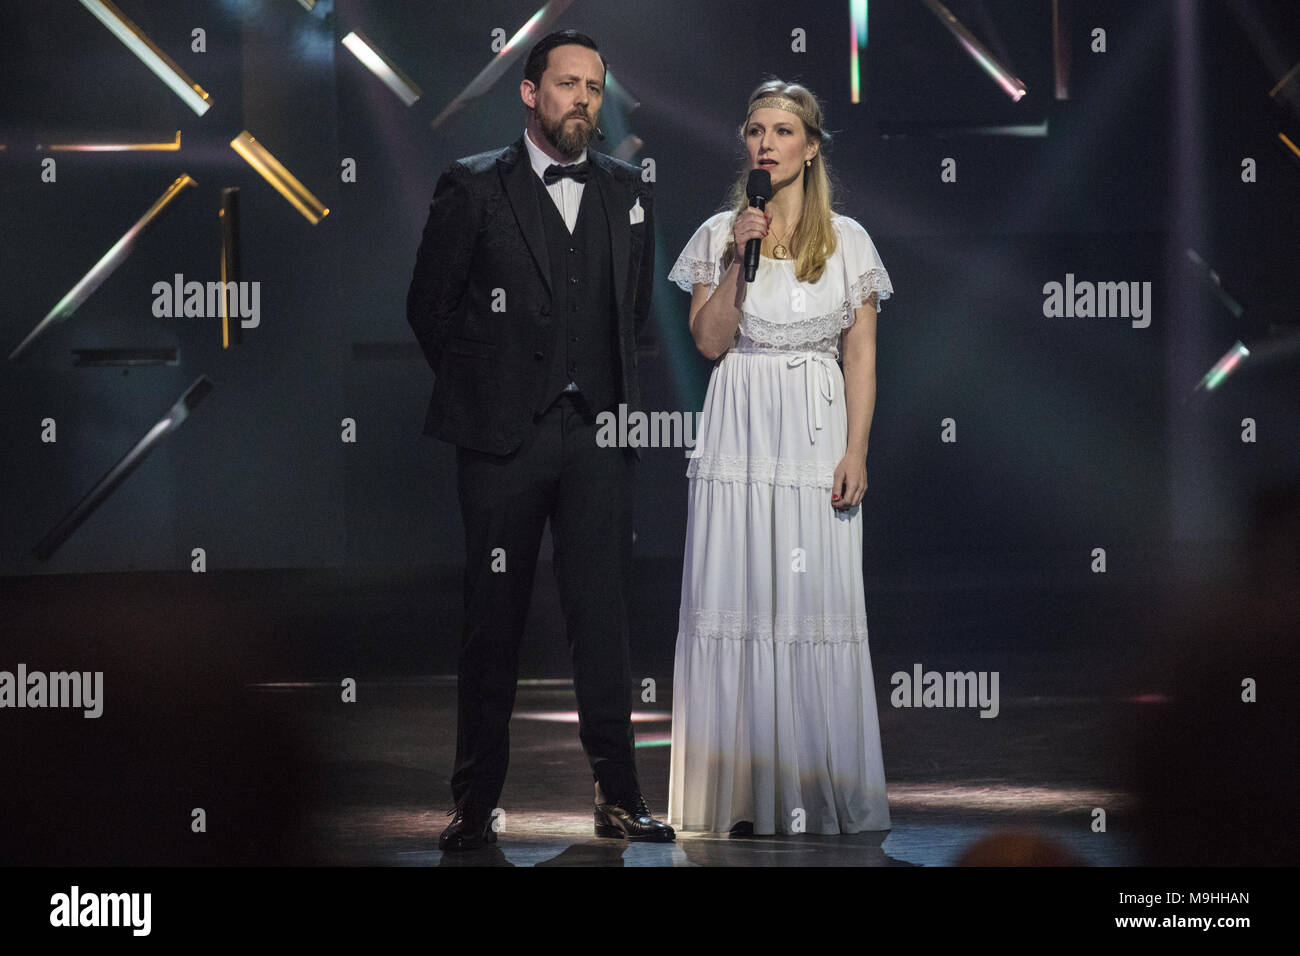 Norway, Oslo - February 25, 2018. The Norwegian musician Tarjei Strøm is hosting the Norwegian Grammy Awards, Spellemannprisen 2017, at Oslo Konserthus in Oslo. Her musician Hedvig Mollestad has joined the stage. (Photo credit: Gonzales Photo - Stian S. Moller). Stock Photo